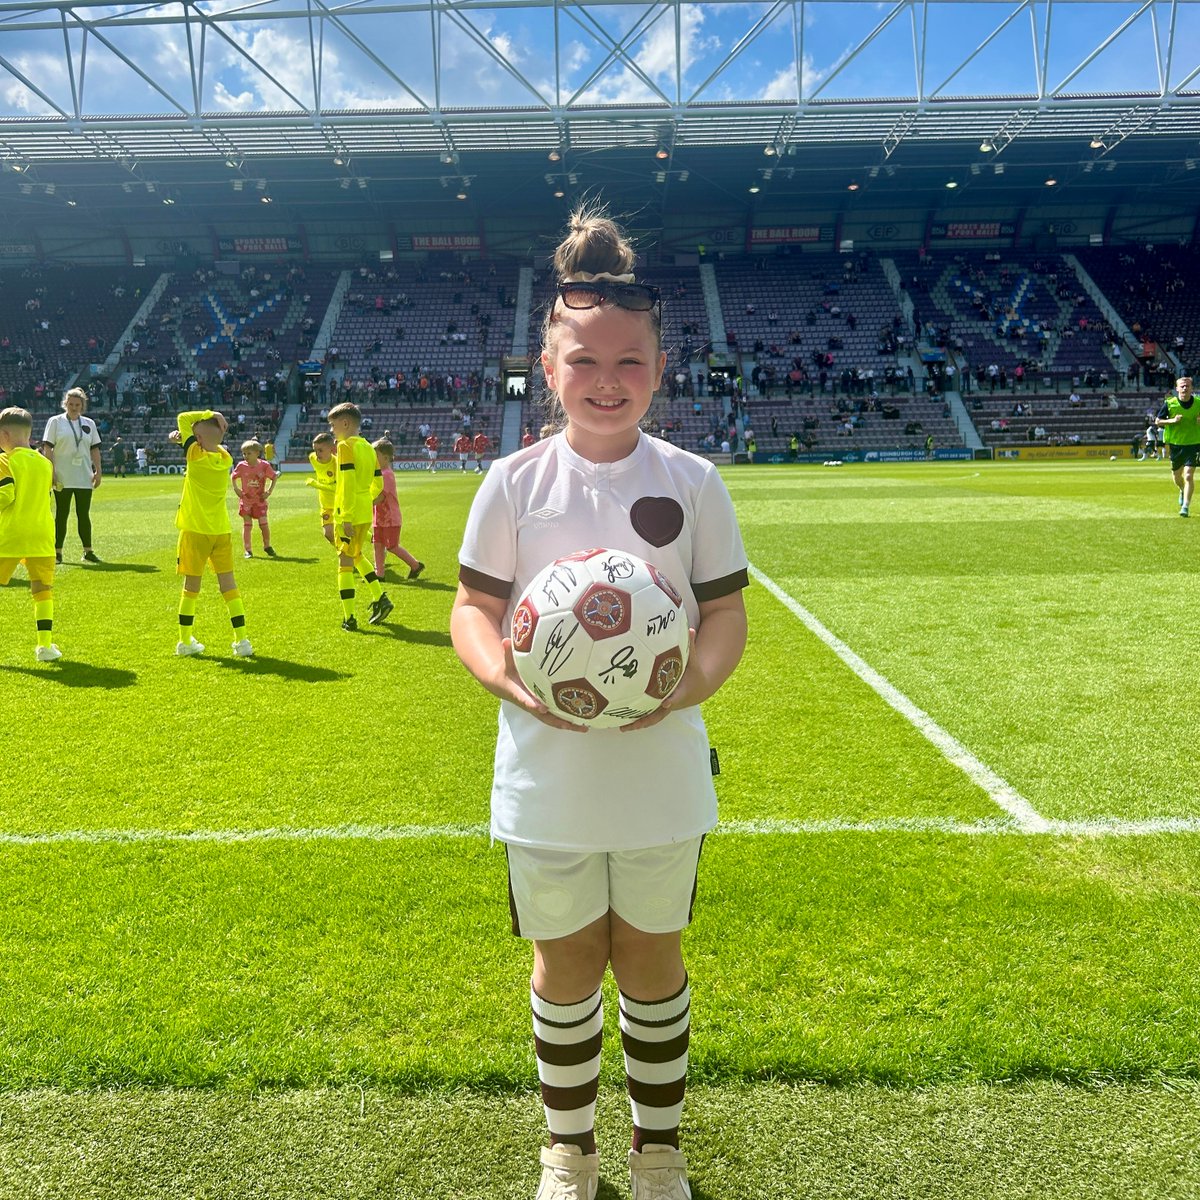 🎉 Congratulations to Ella-Rose, our @FanHub Jambo of the Month for April! ♥️ Ella-Rose was voted for by fellow Jambos over on the @FanHub app 📲 faneconomy.app.link/XcwdJD7ndJb